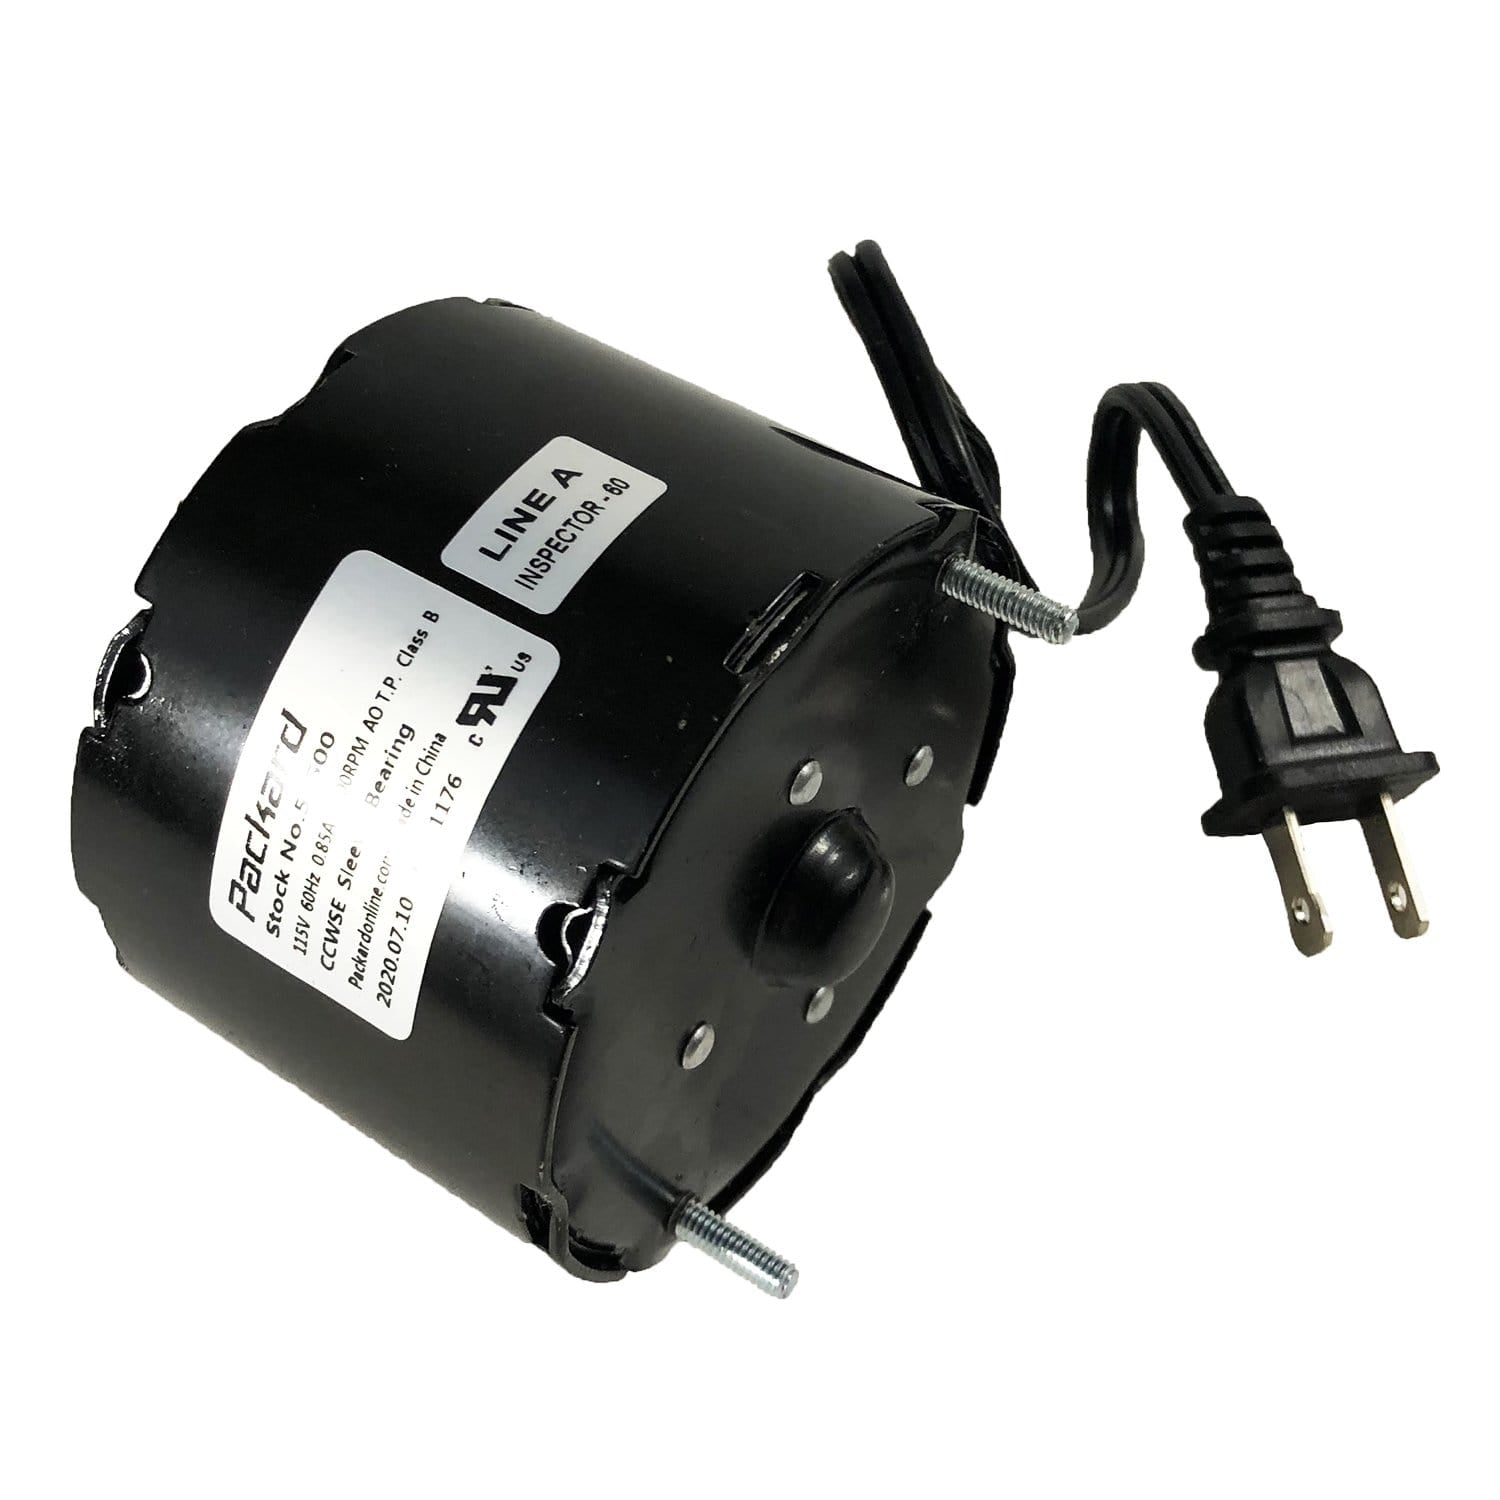 Packard 50500 3000 RPM 115 Volt Shaded Pole Motor